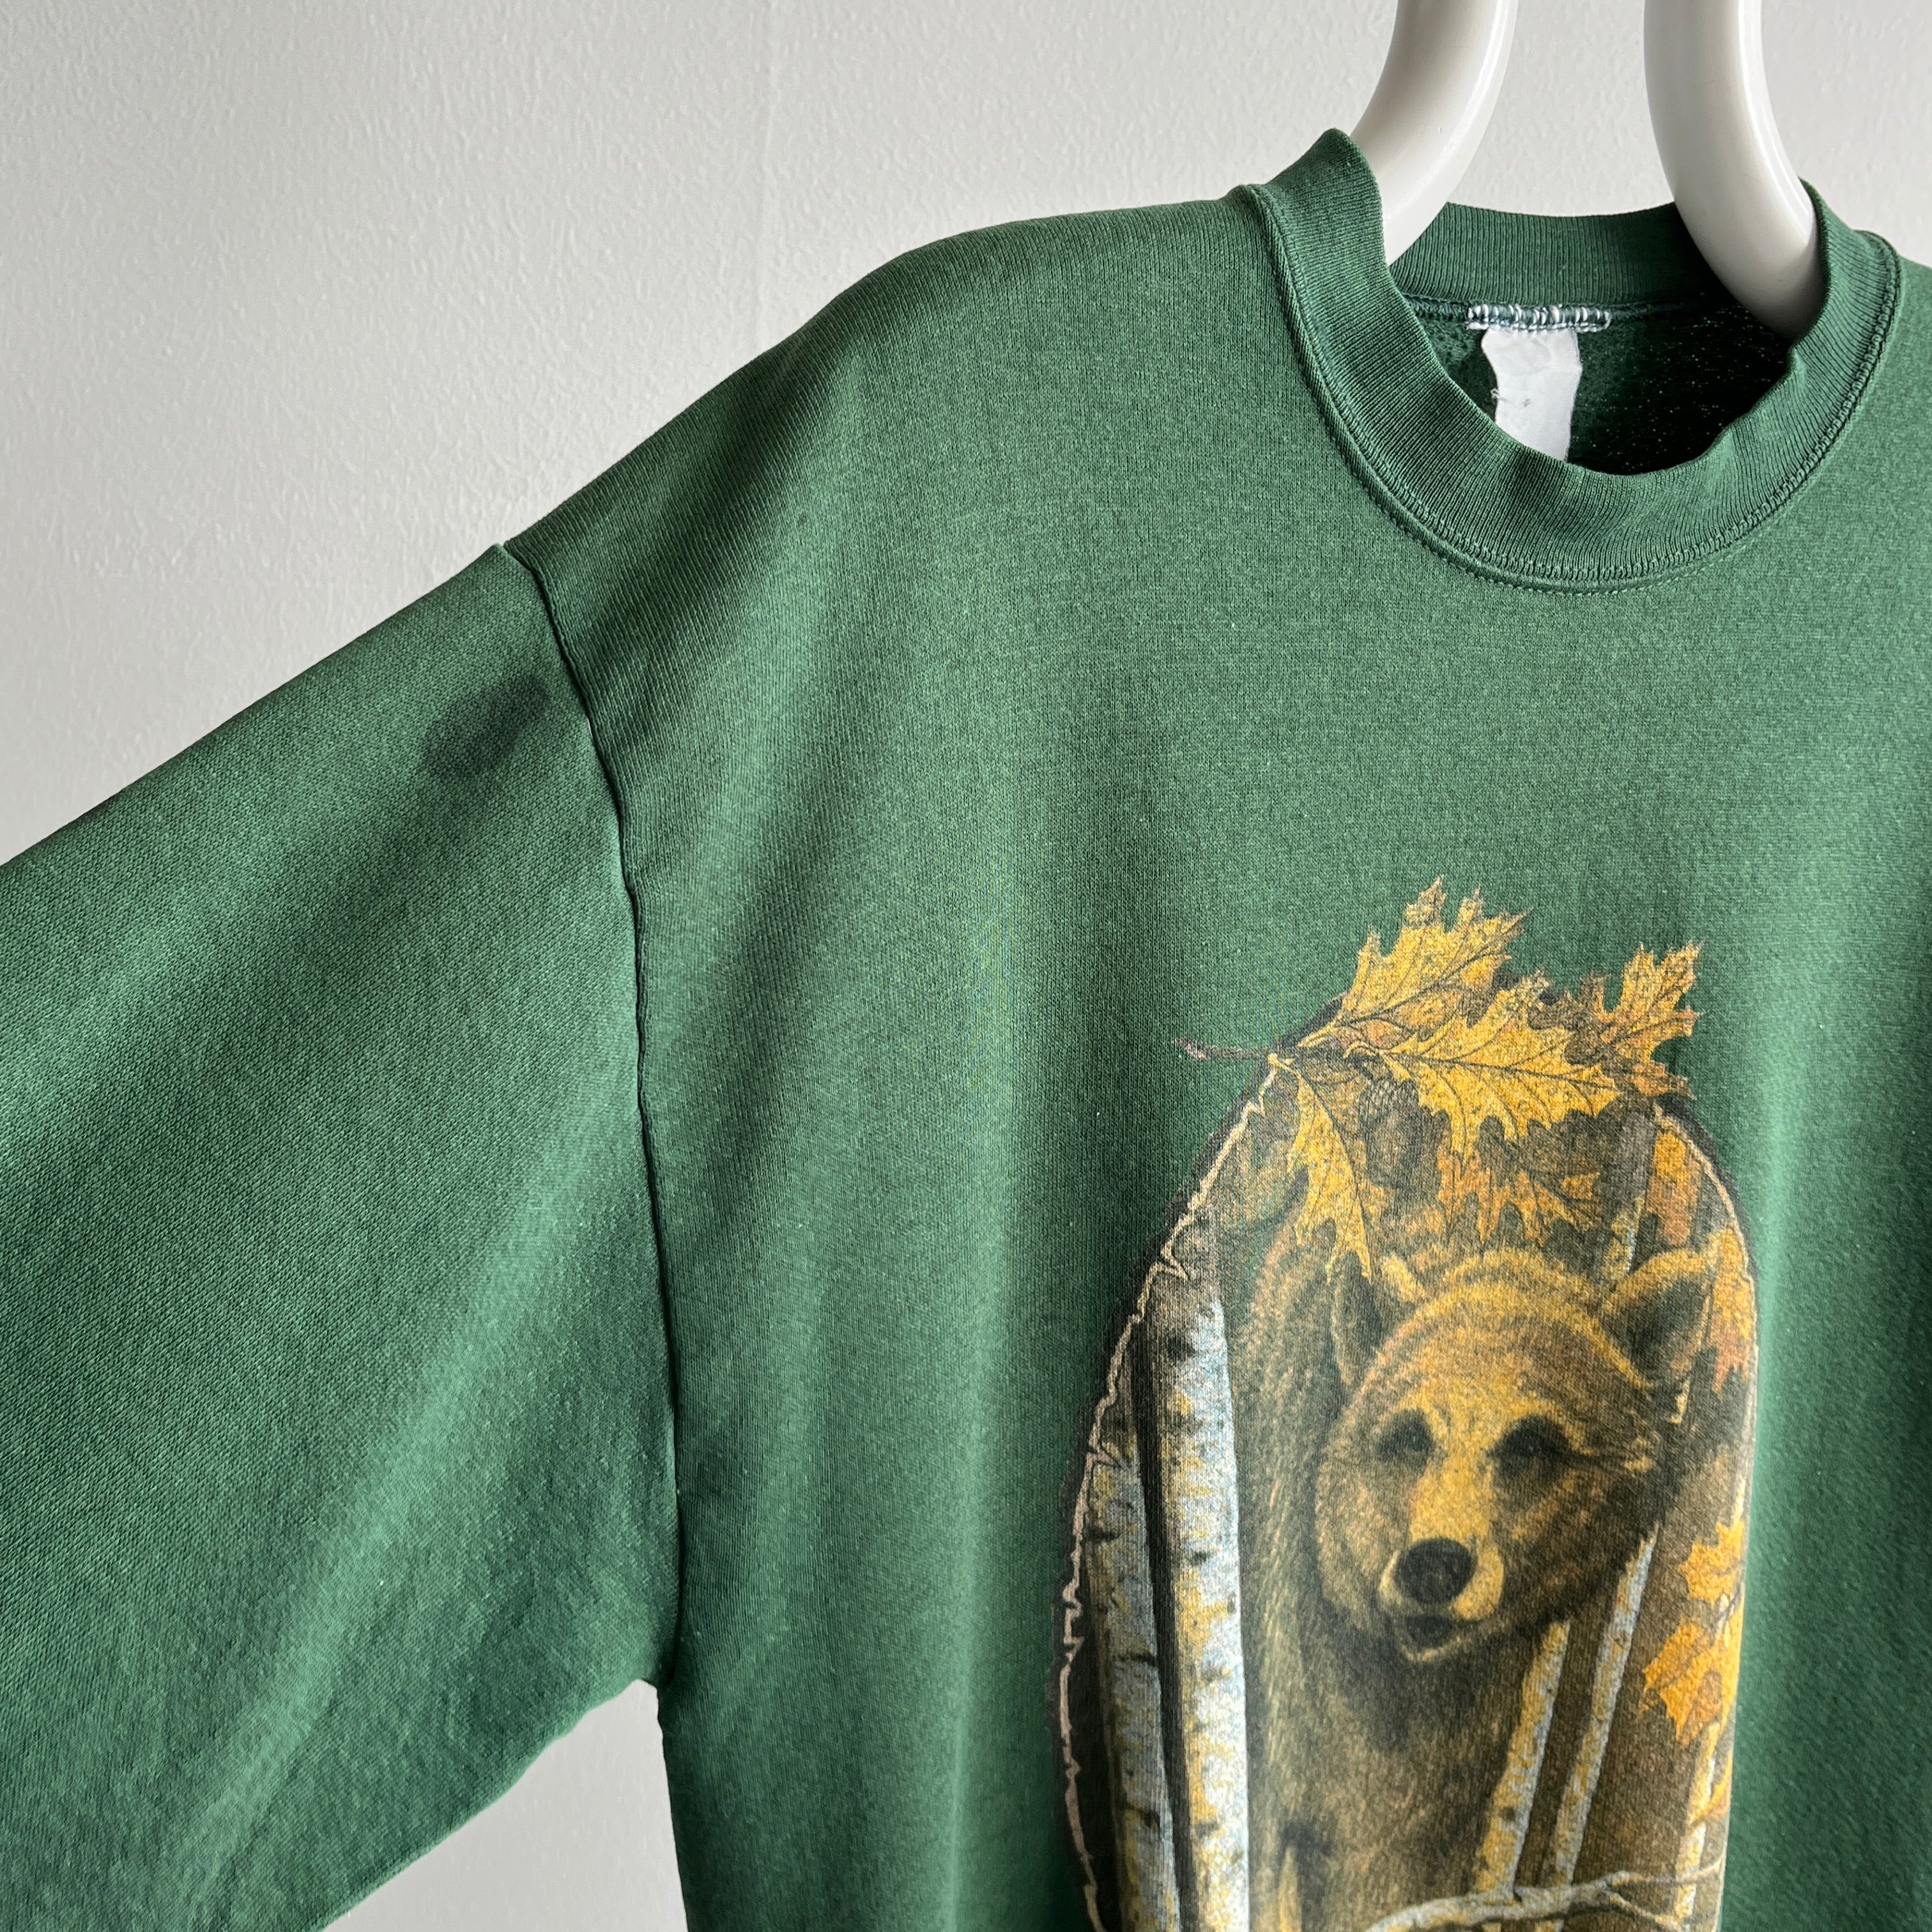 1980s Off Centered Bear Sweatshirt - REALLY WORN OUT